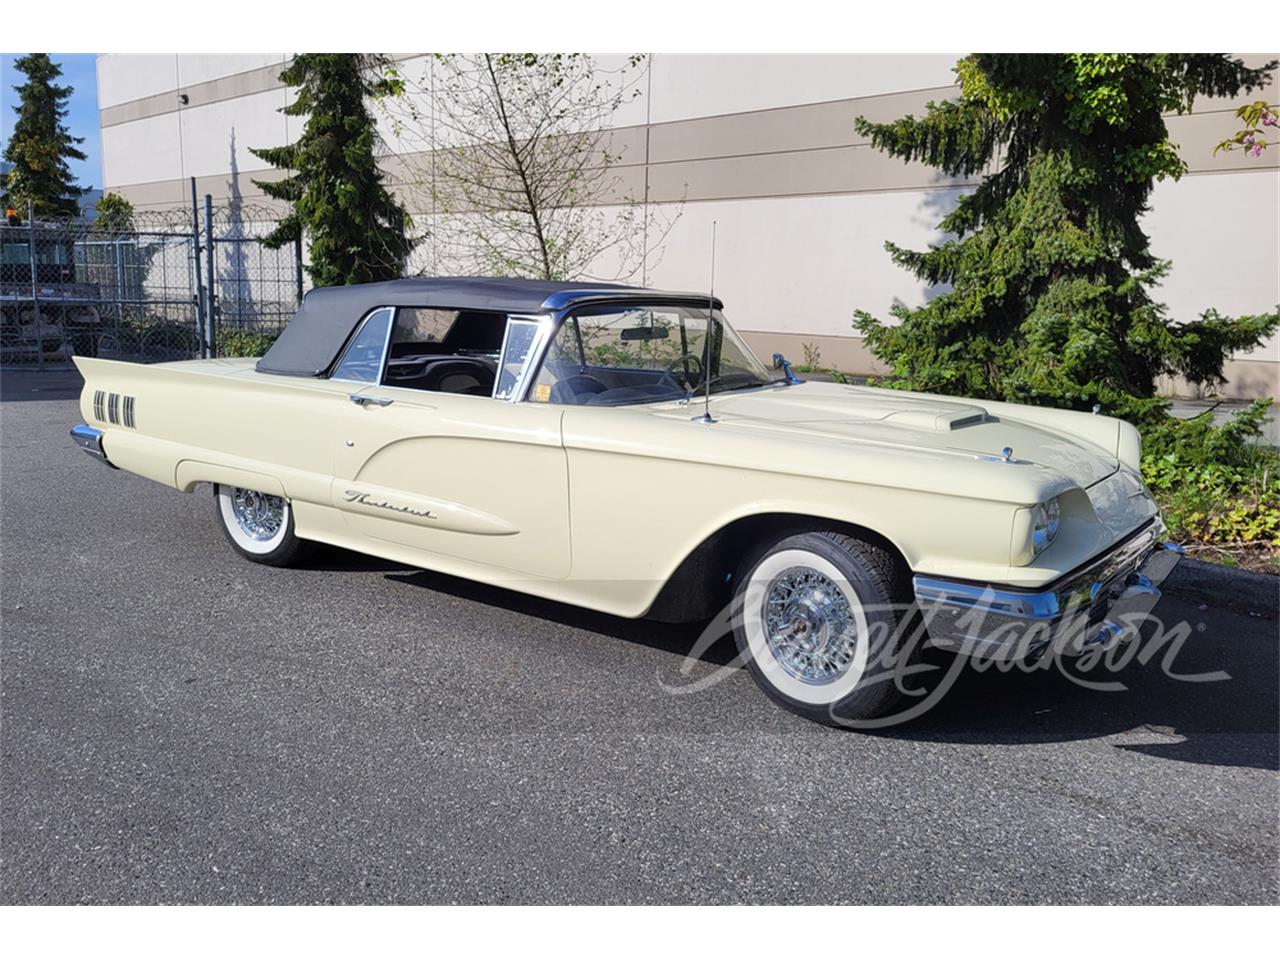 For Sale at Auction: 1960 Ford Thunderbird in Las Vegas, Nevada for sale in Las Vegas, NV